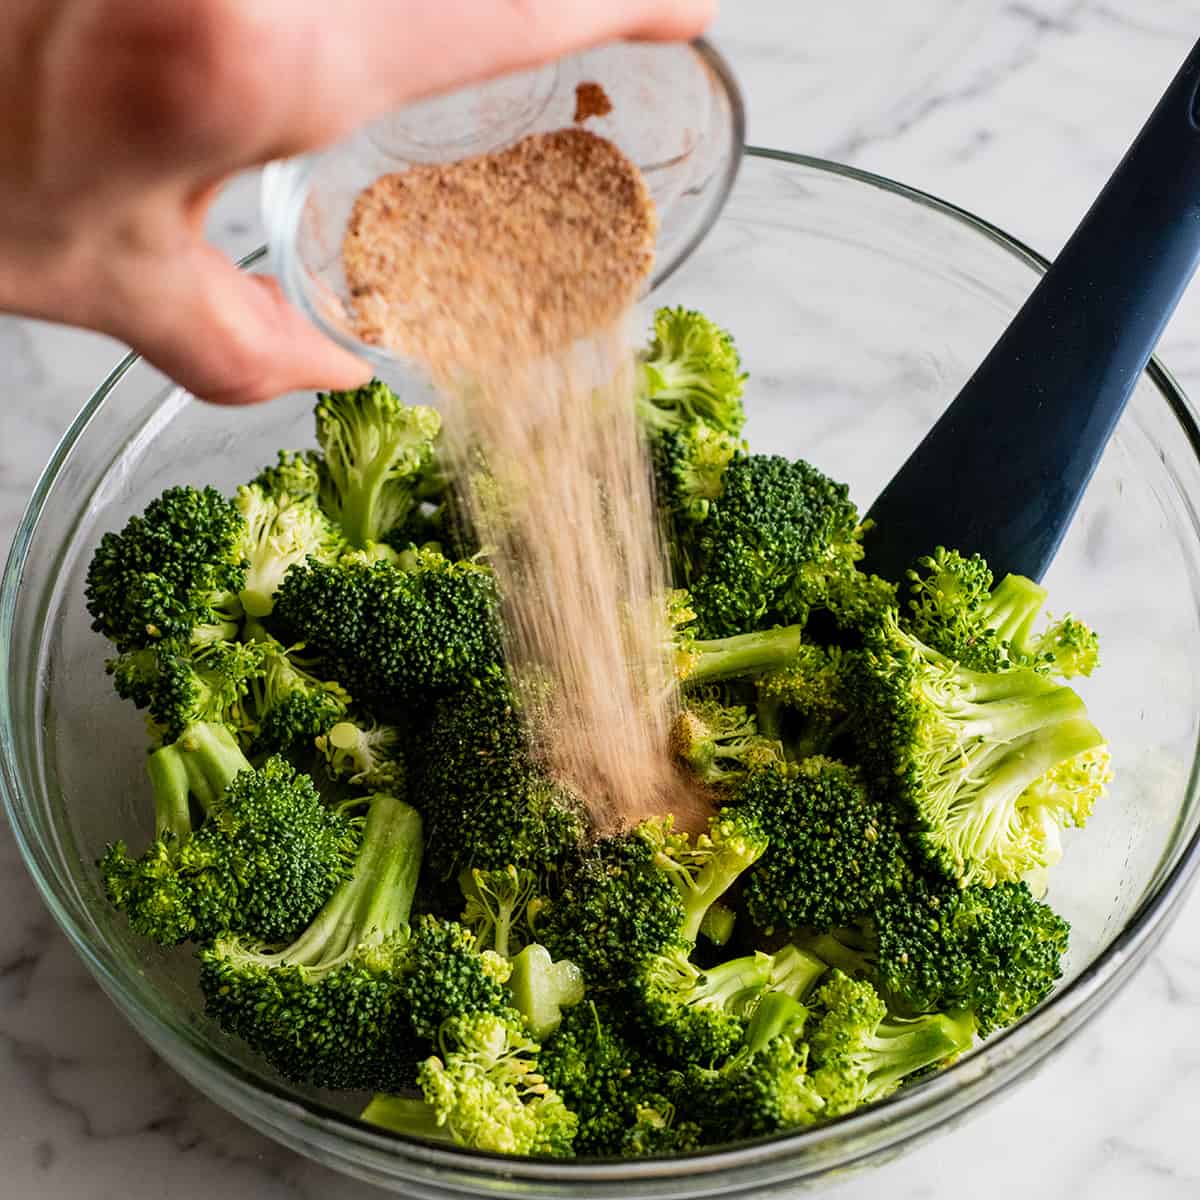 photo showing how to roast broccoli - pouring spice mixture onto oiled broccoli